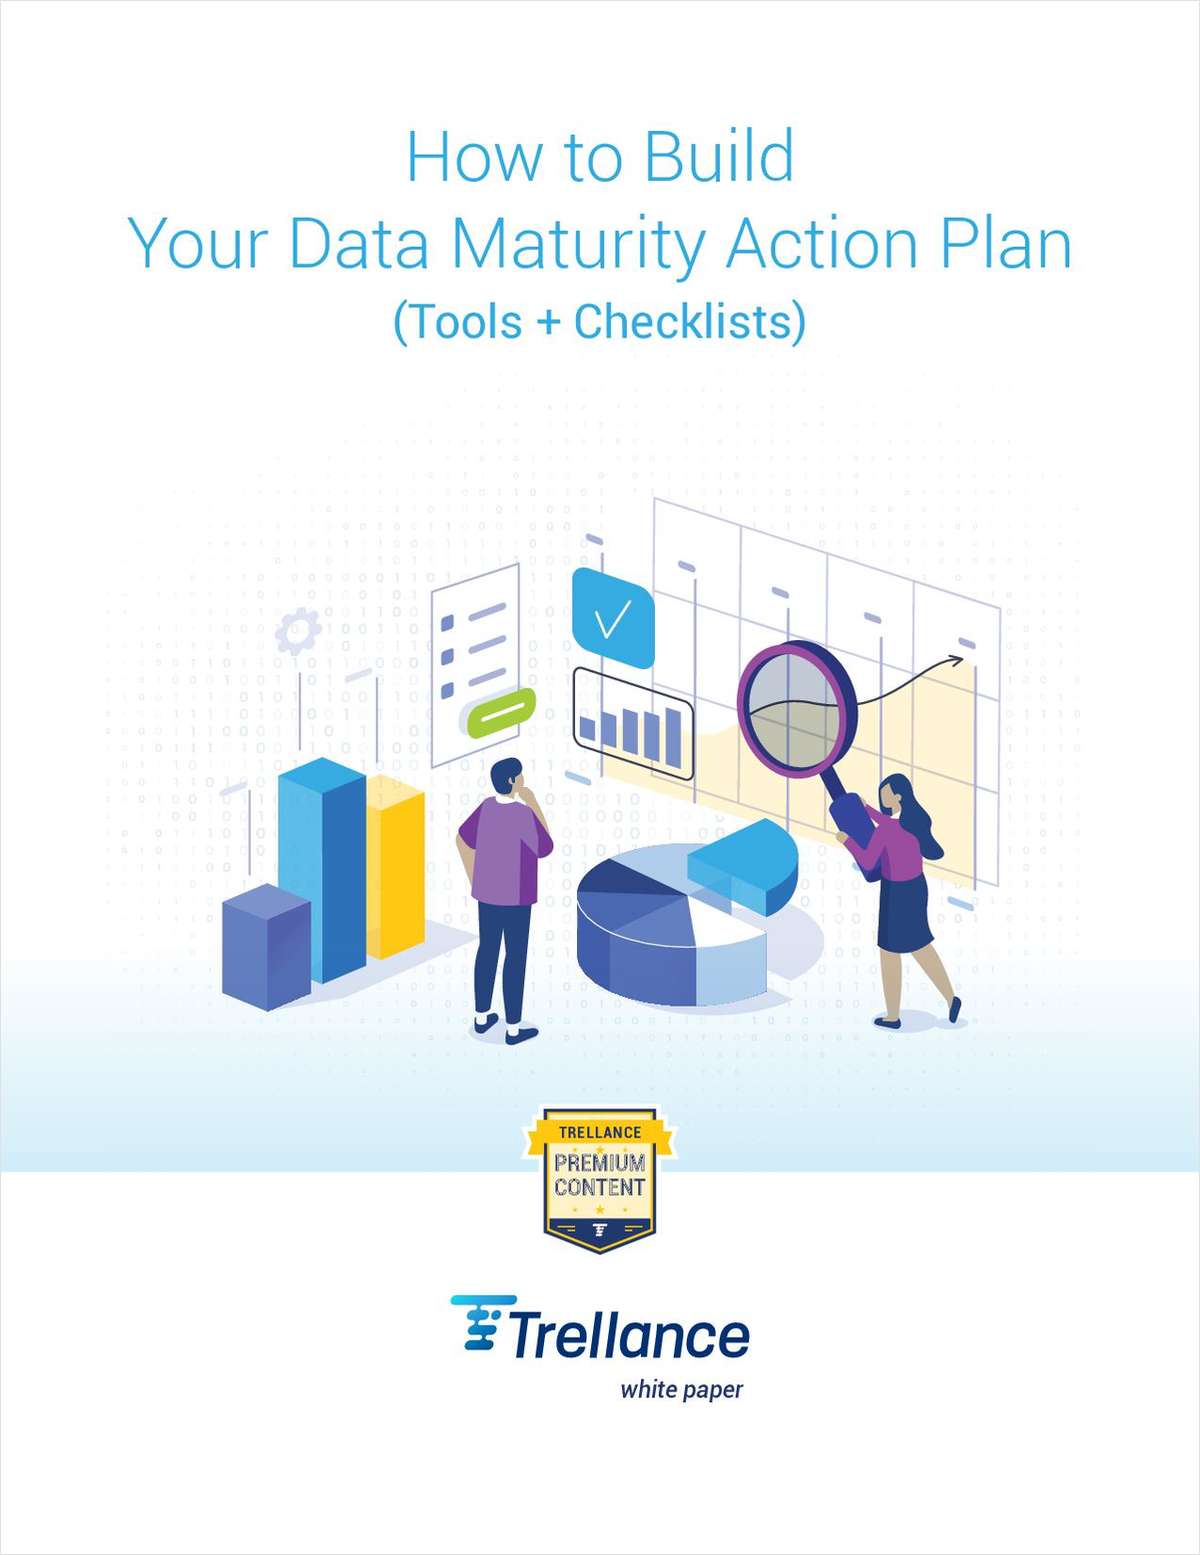 How to Build Your Data Maturity Action Plan (Tools + Checklists) link